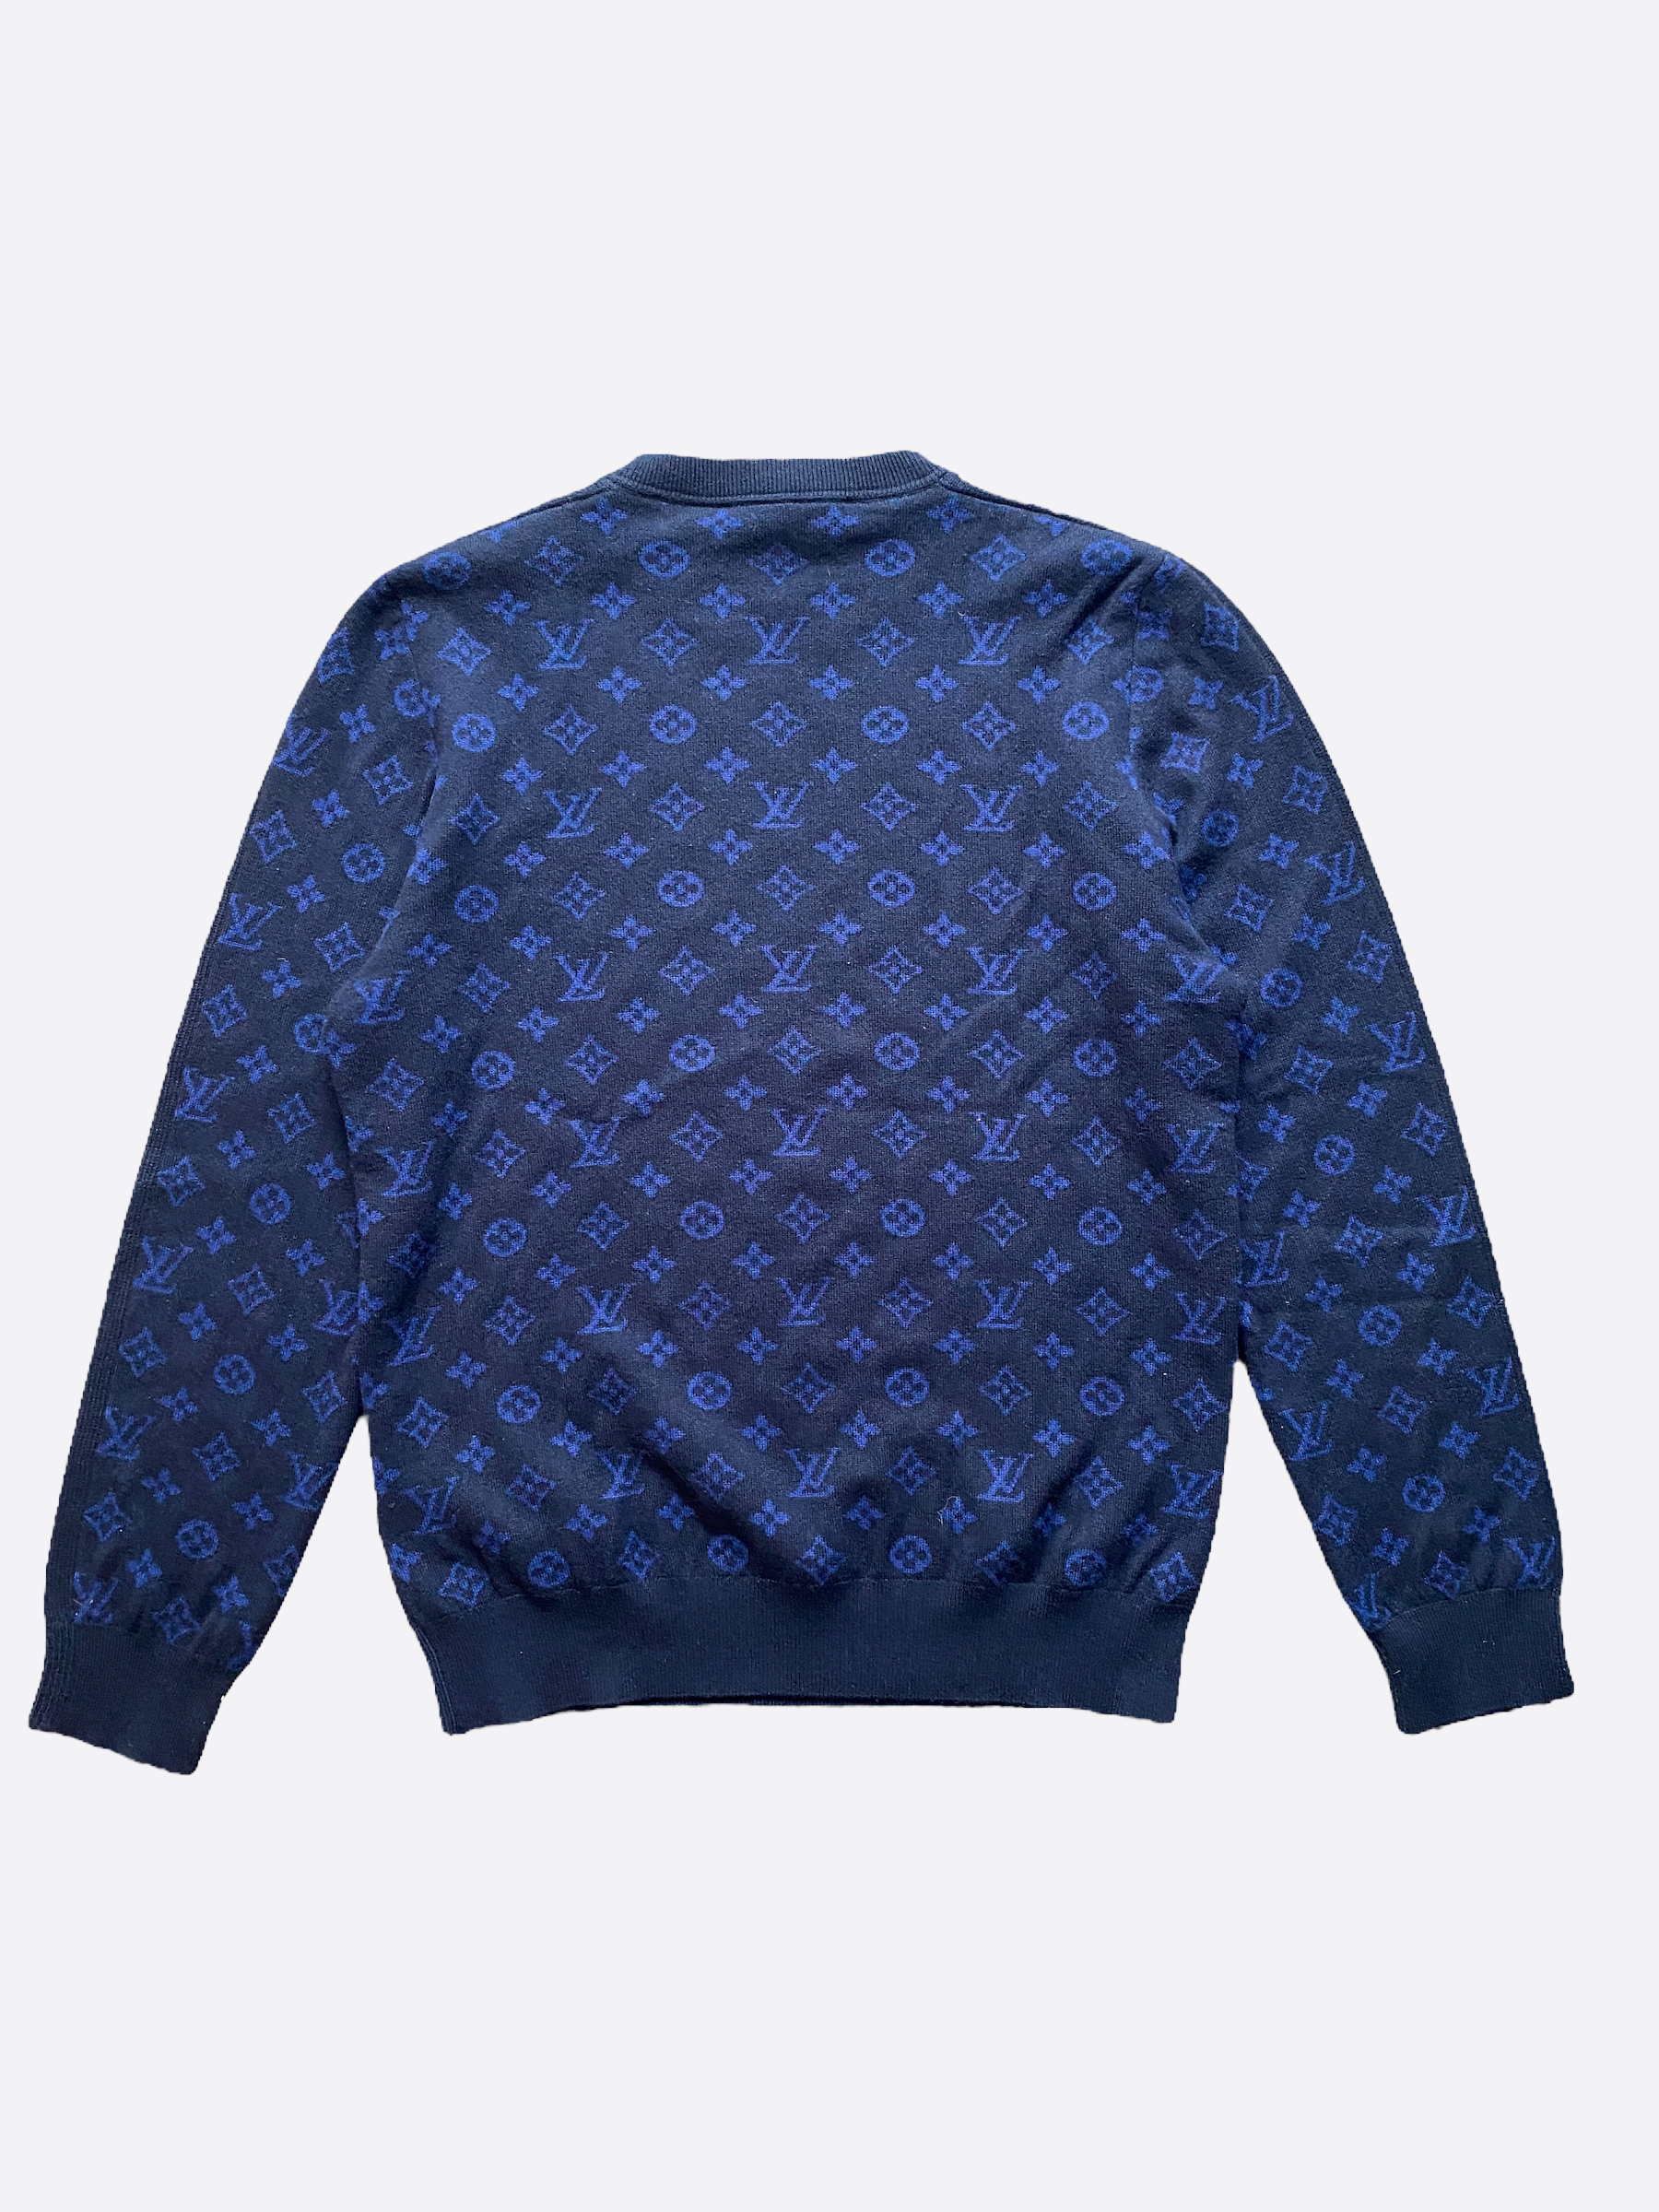 Louis Vuitton Regular Size Sweaters for Women for sale